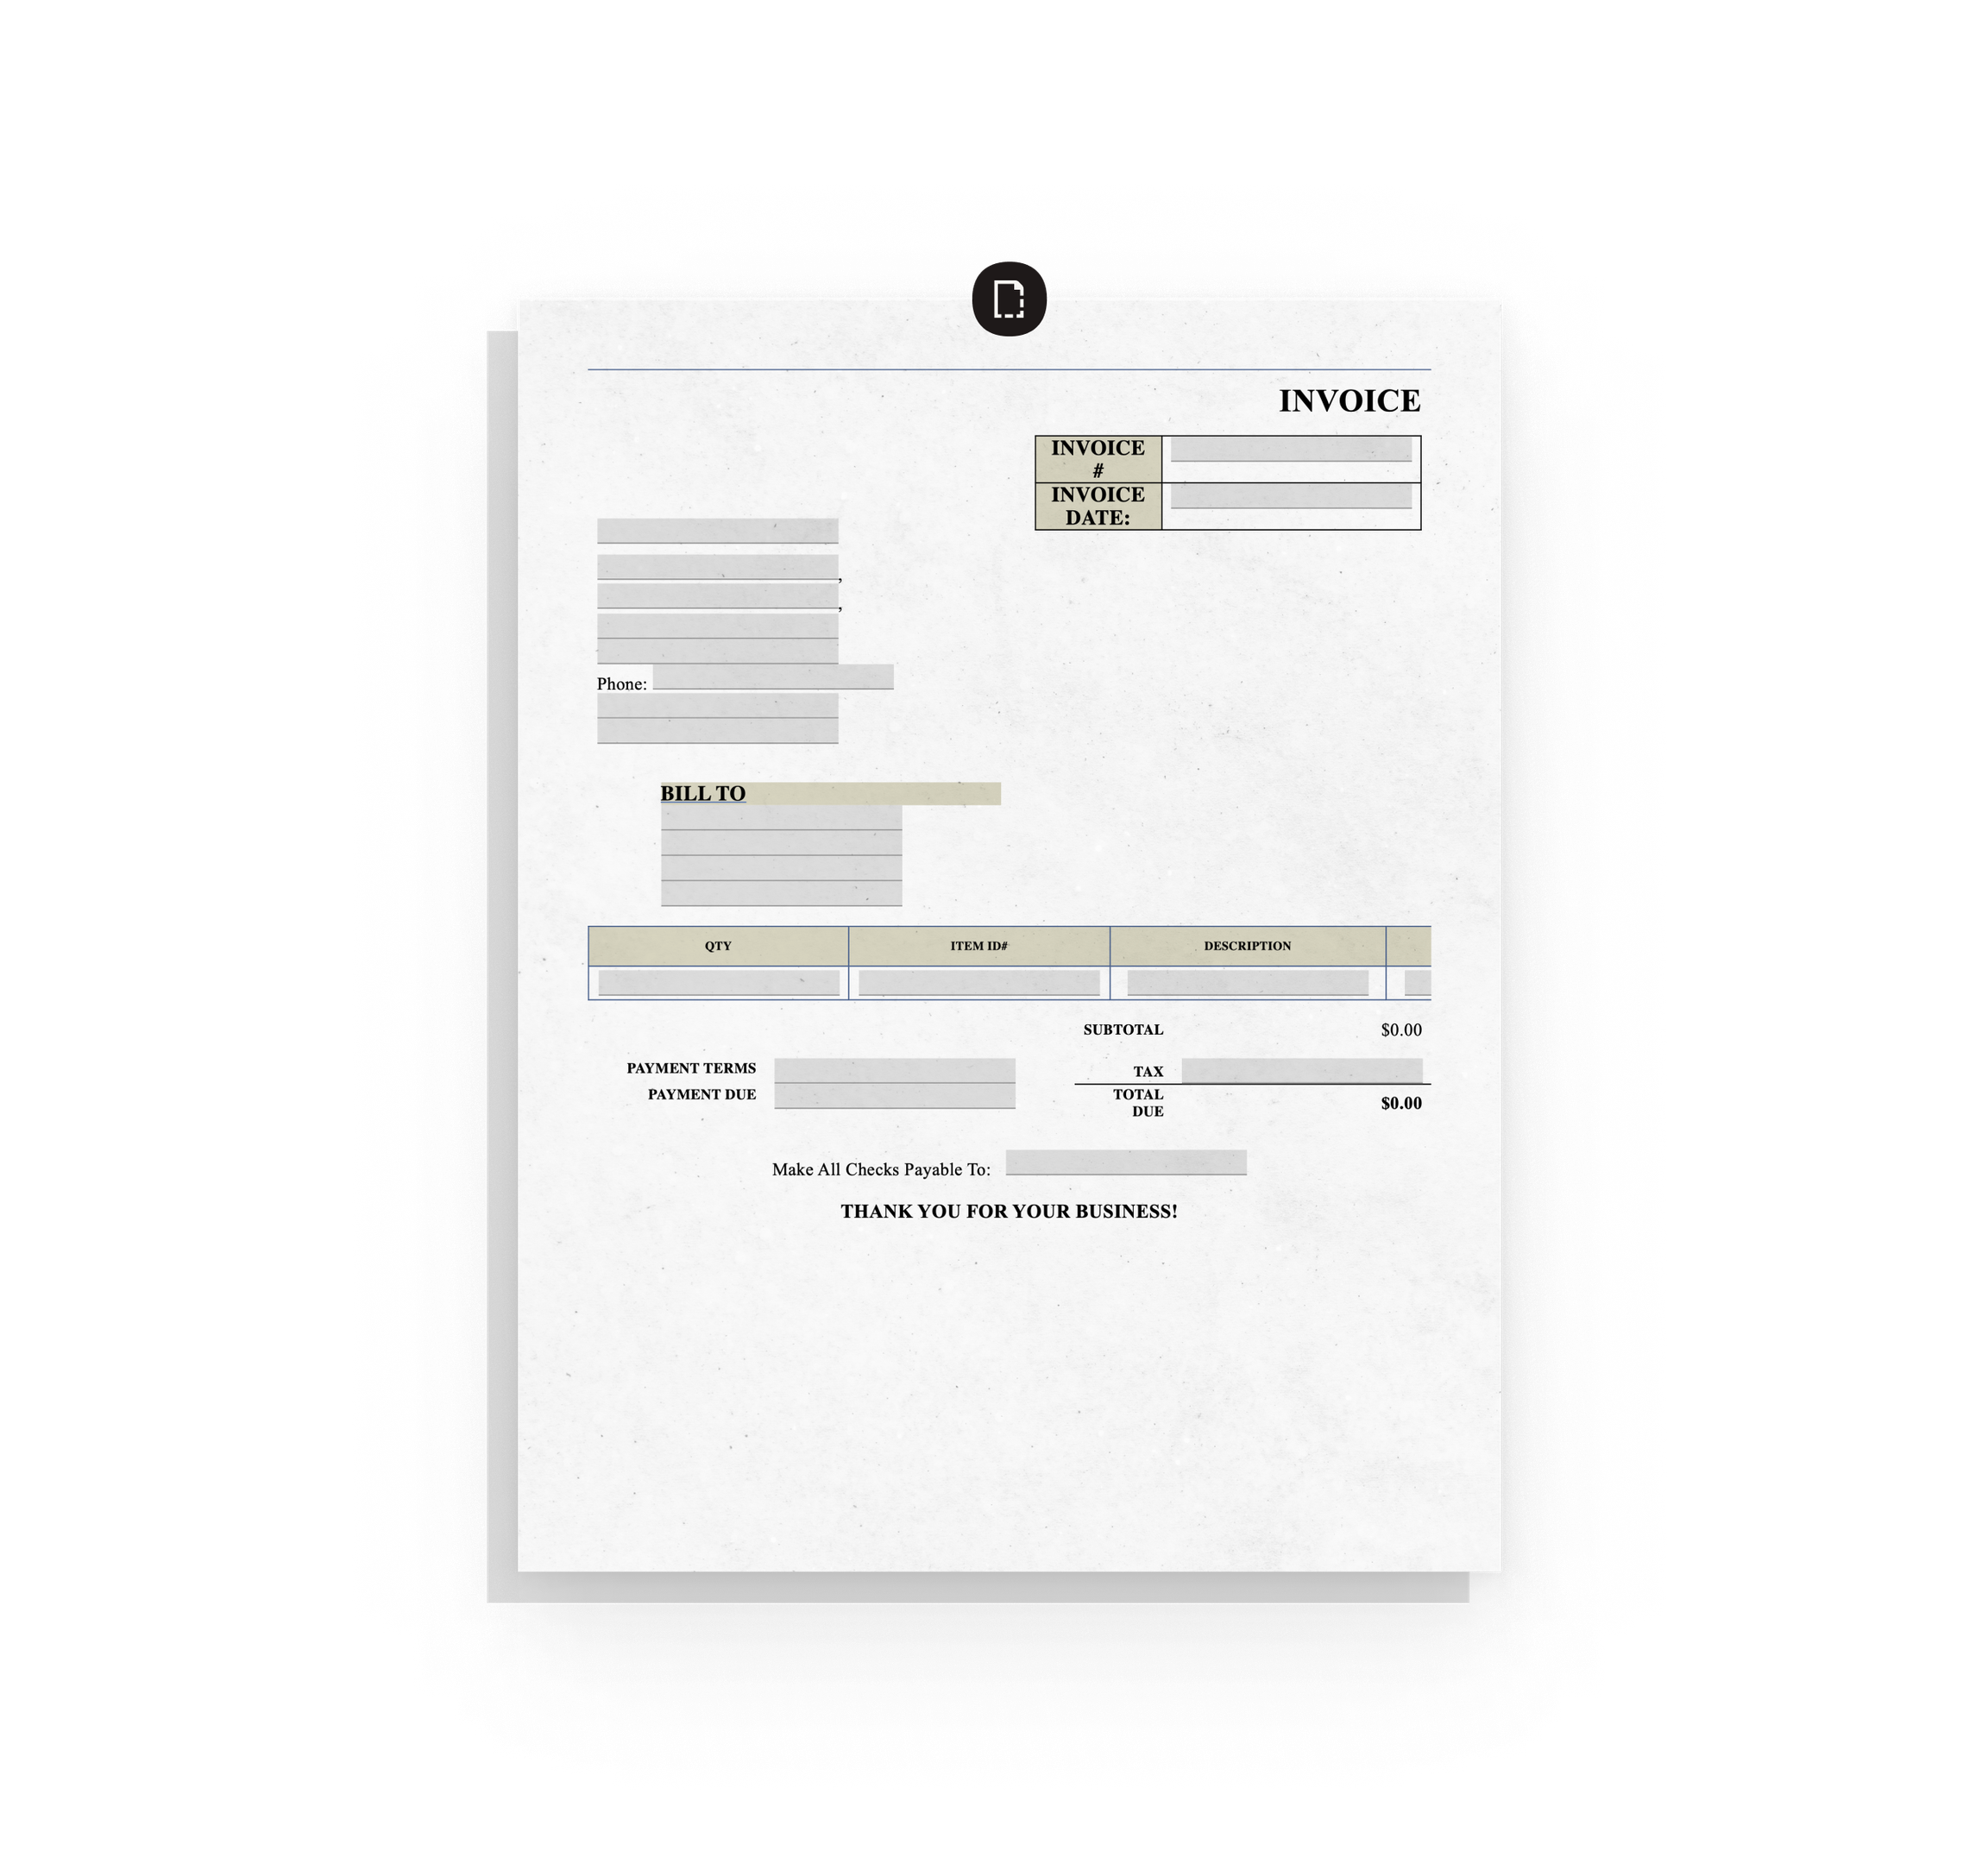 Invoice forms